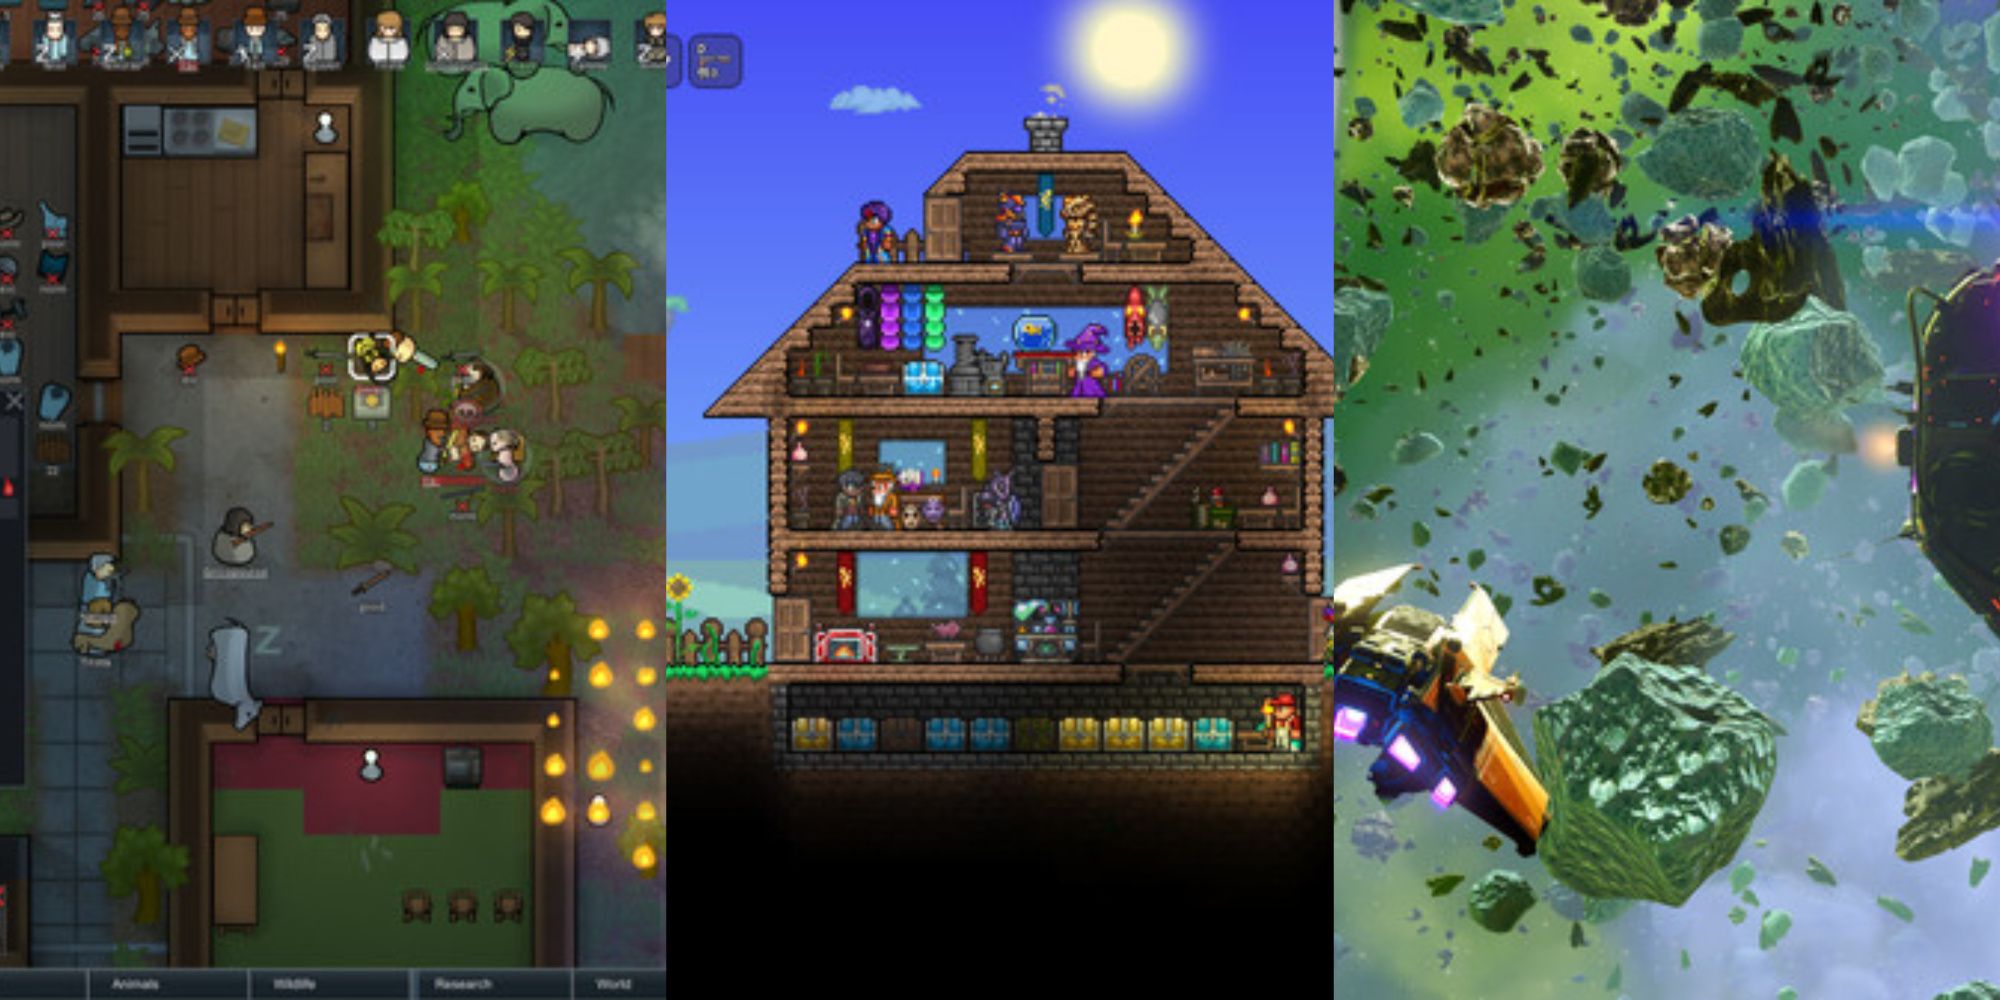 A collage showing gameplay from Rimworld, Terraria, No Man's Sky.